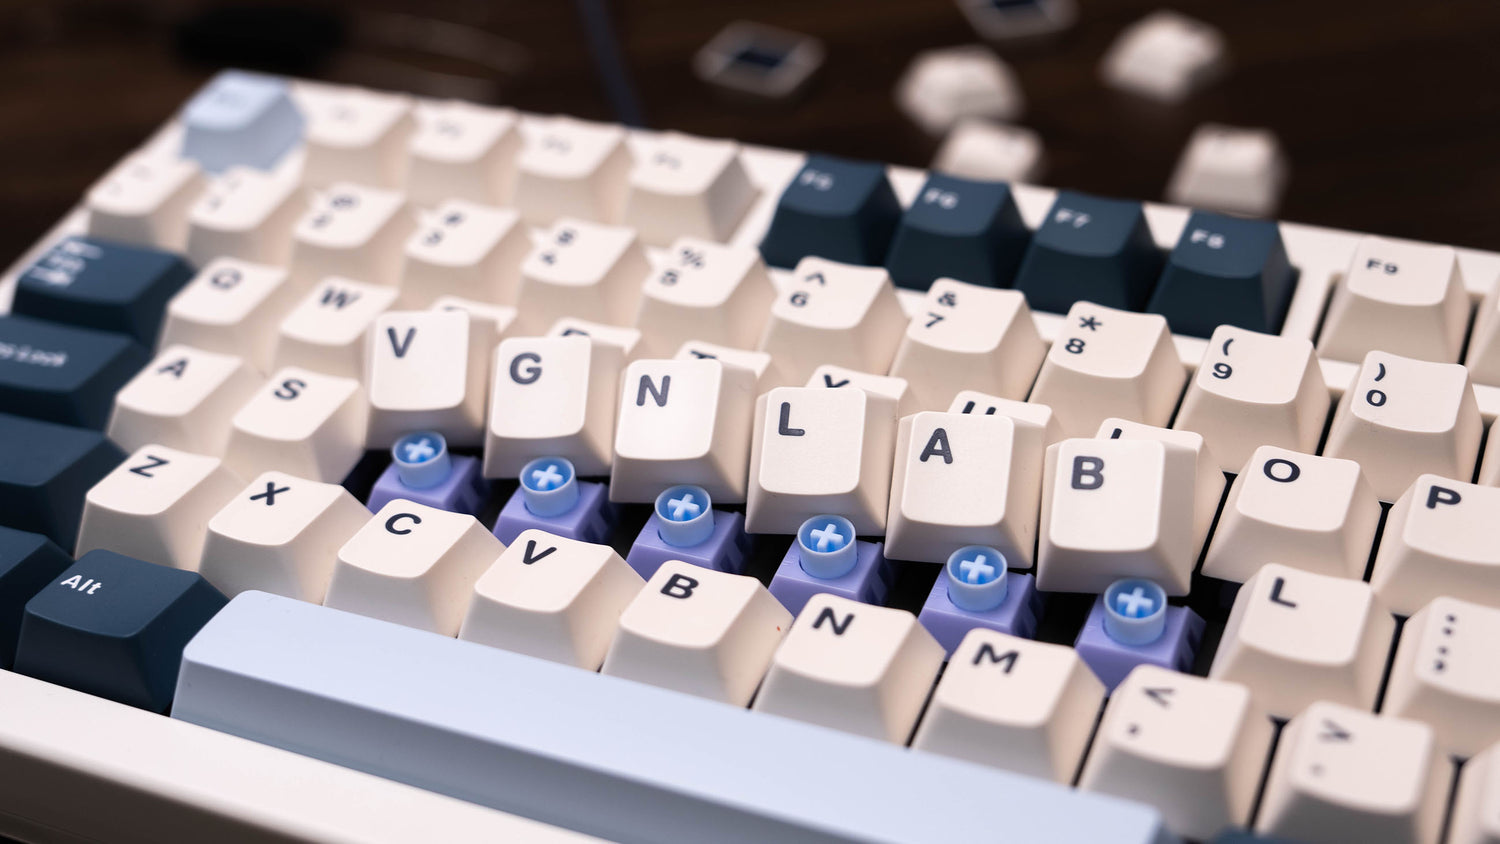 What to Do When Your Mechanical Keyboard Malfunctions